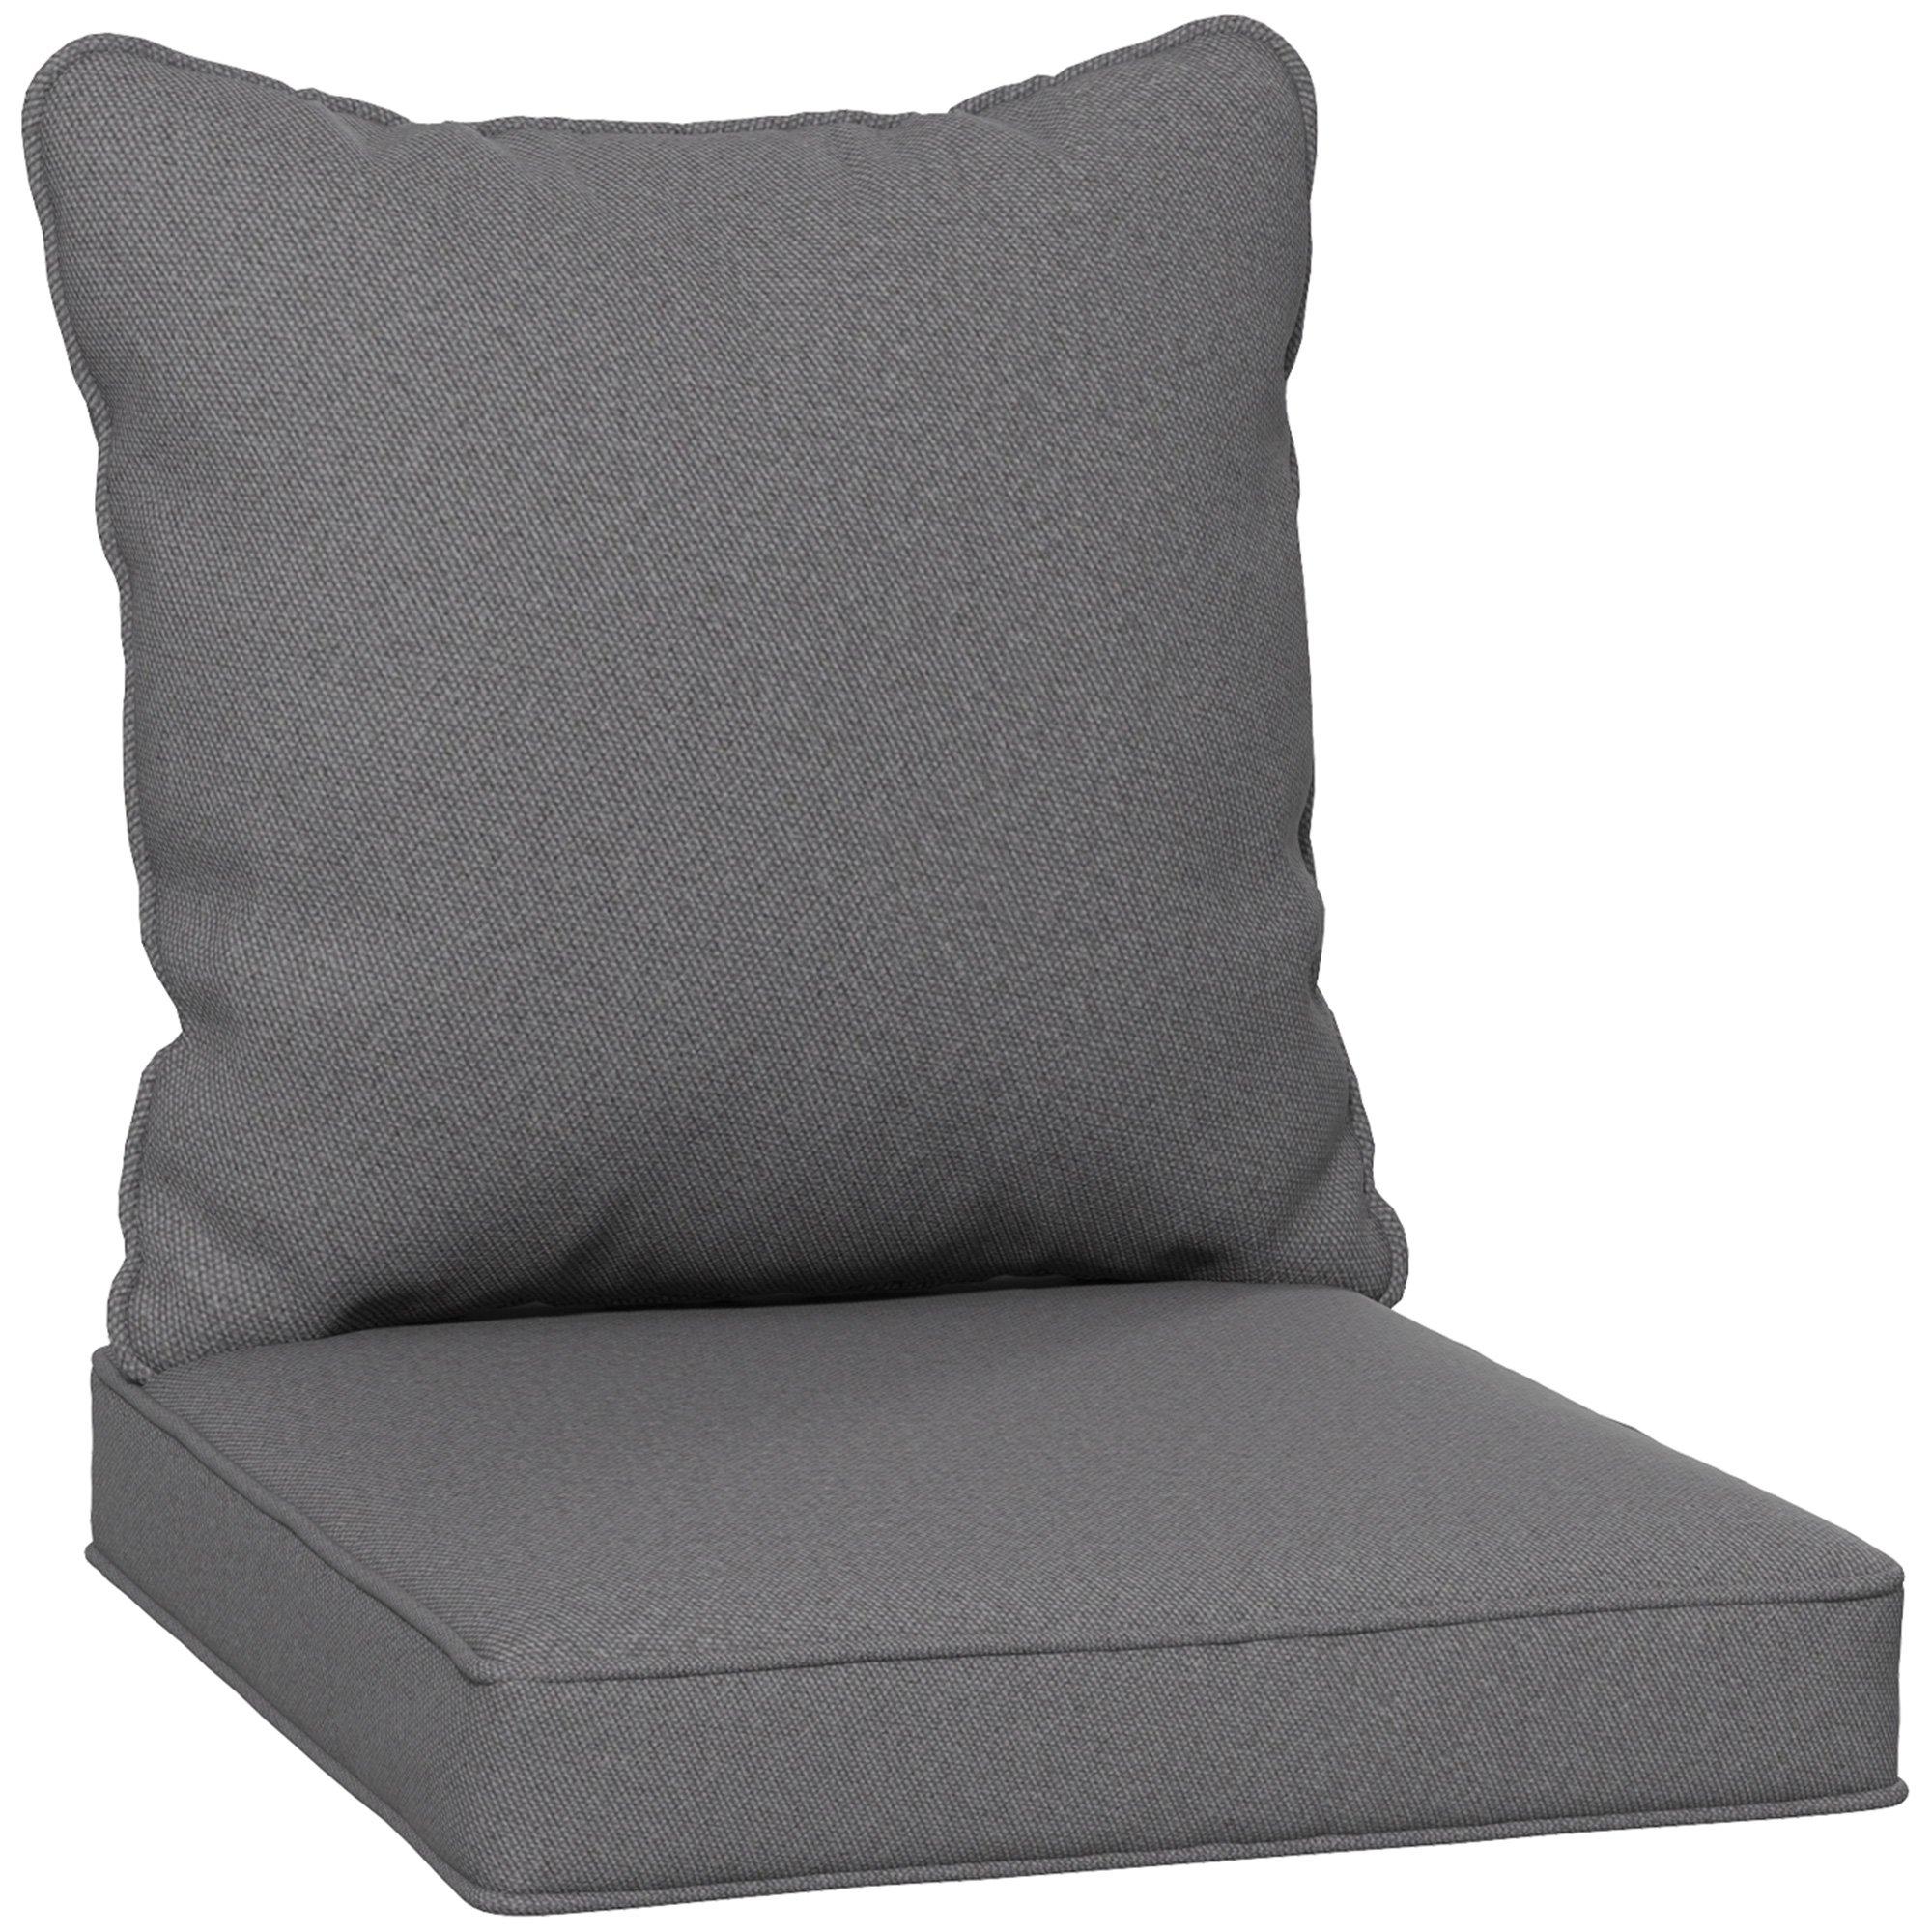 One-piece Seat Cushion for Outdoor Garden with Backrest, Charcoal Grey